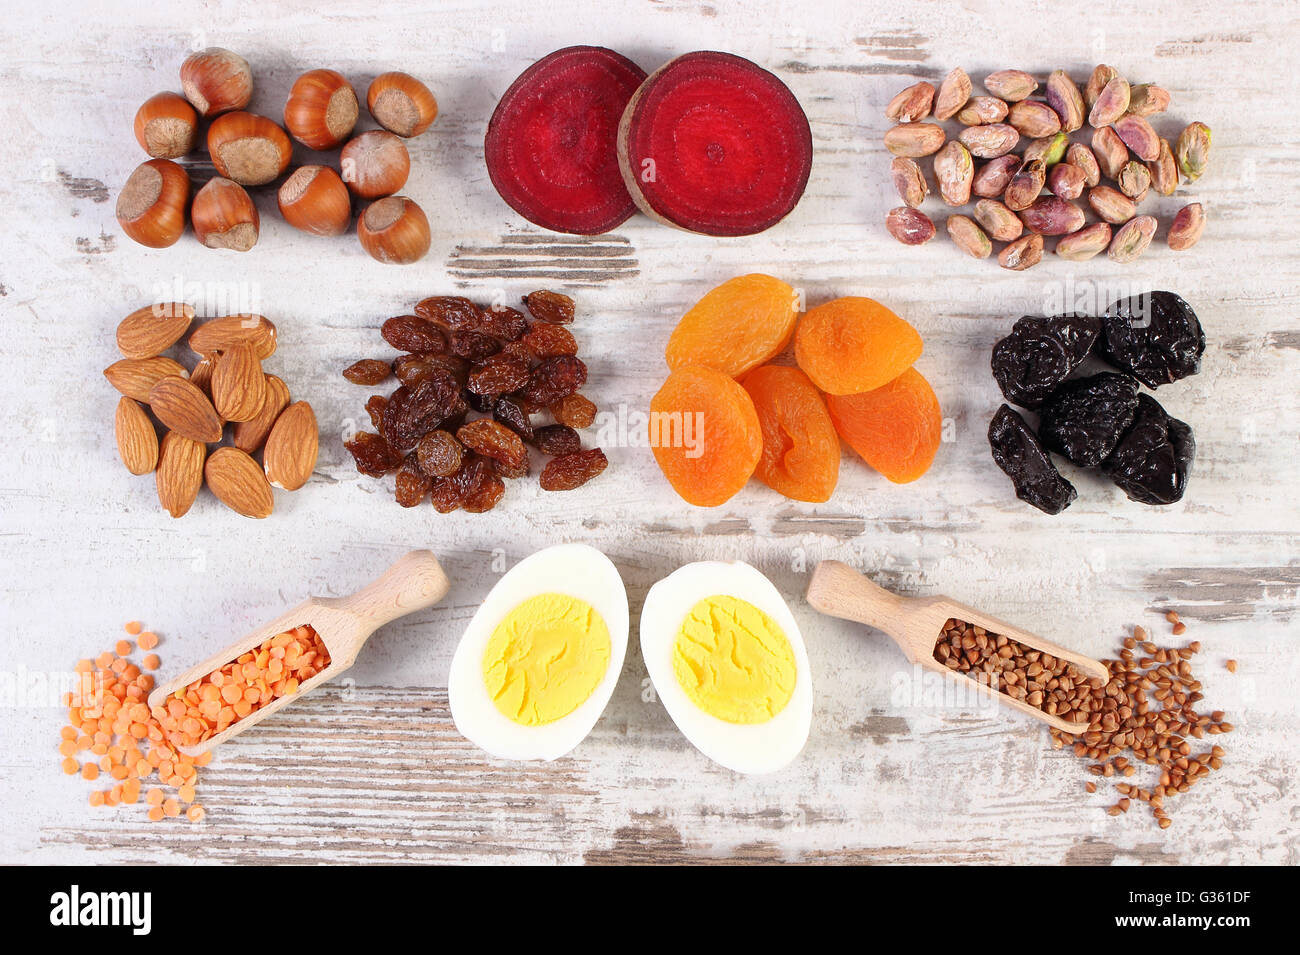 Ingredients and product containing iron and dietary fiber, natural sources of ferrum, healthy lifestyle and nutrition Stock Photo